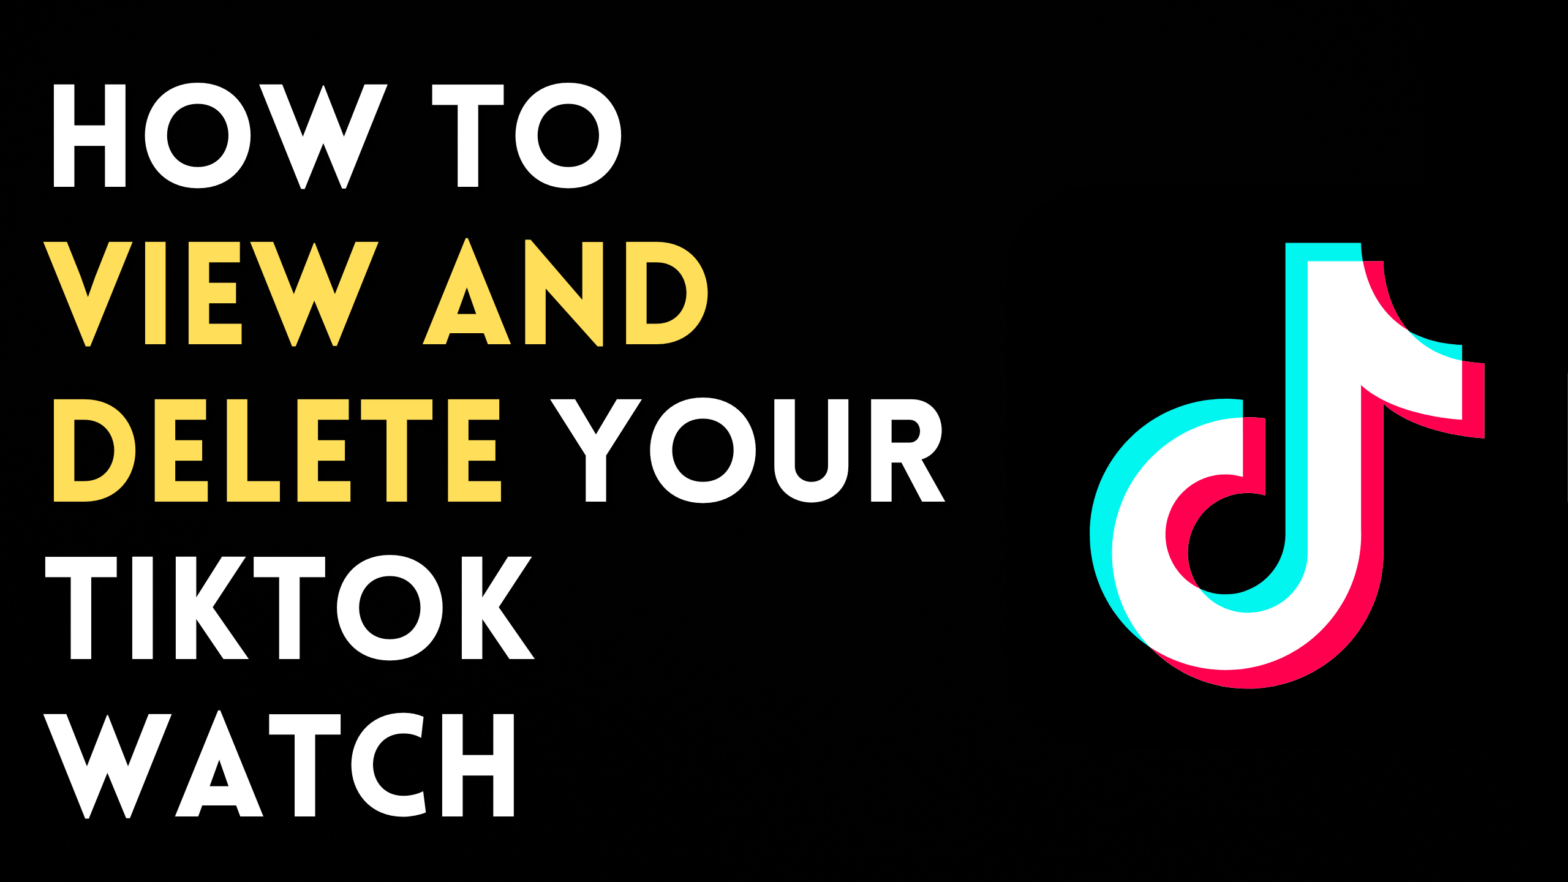 How To View And Delete Your TikTok Watch History In 4 Easy Steps?